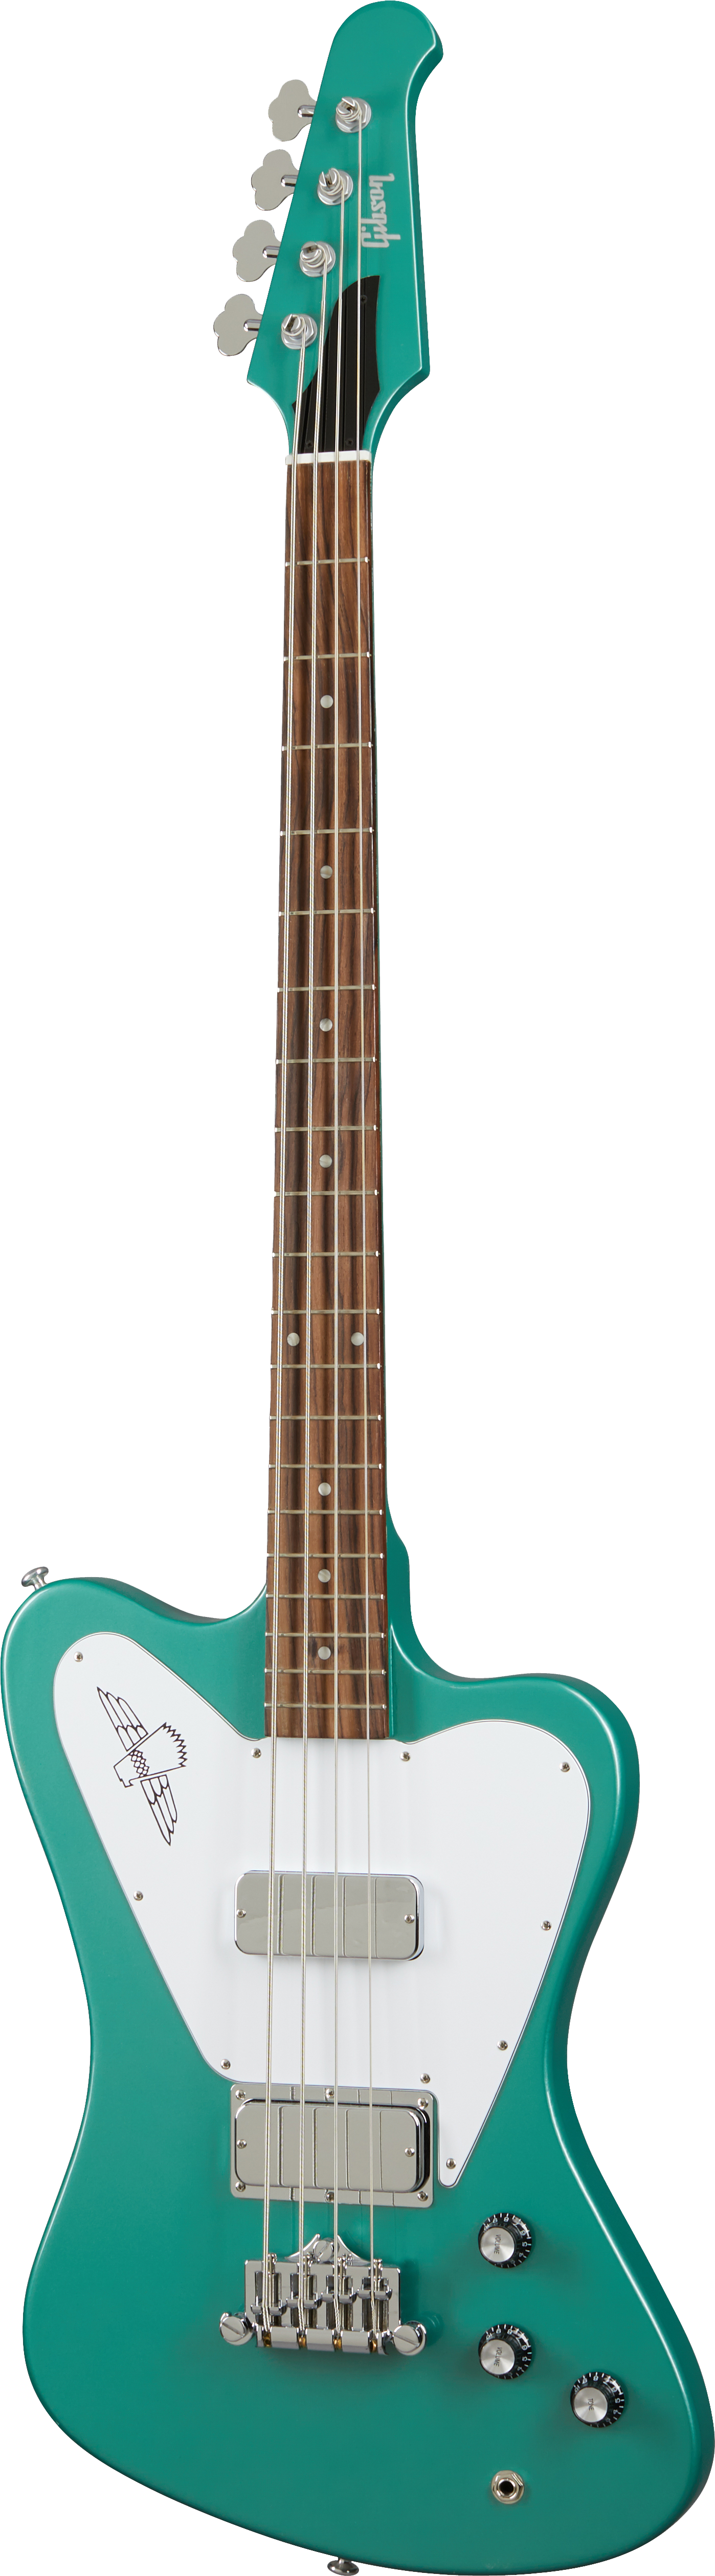 Full frontal of Gibson Thunderbird Bass Inverness Green Non-reverse Headstock.